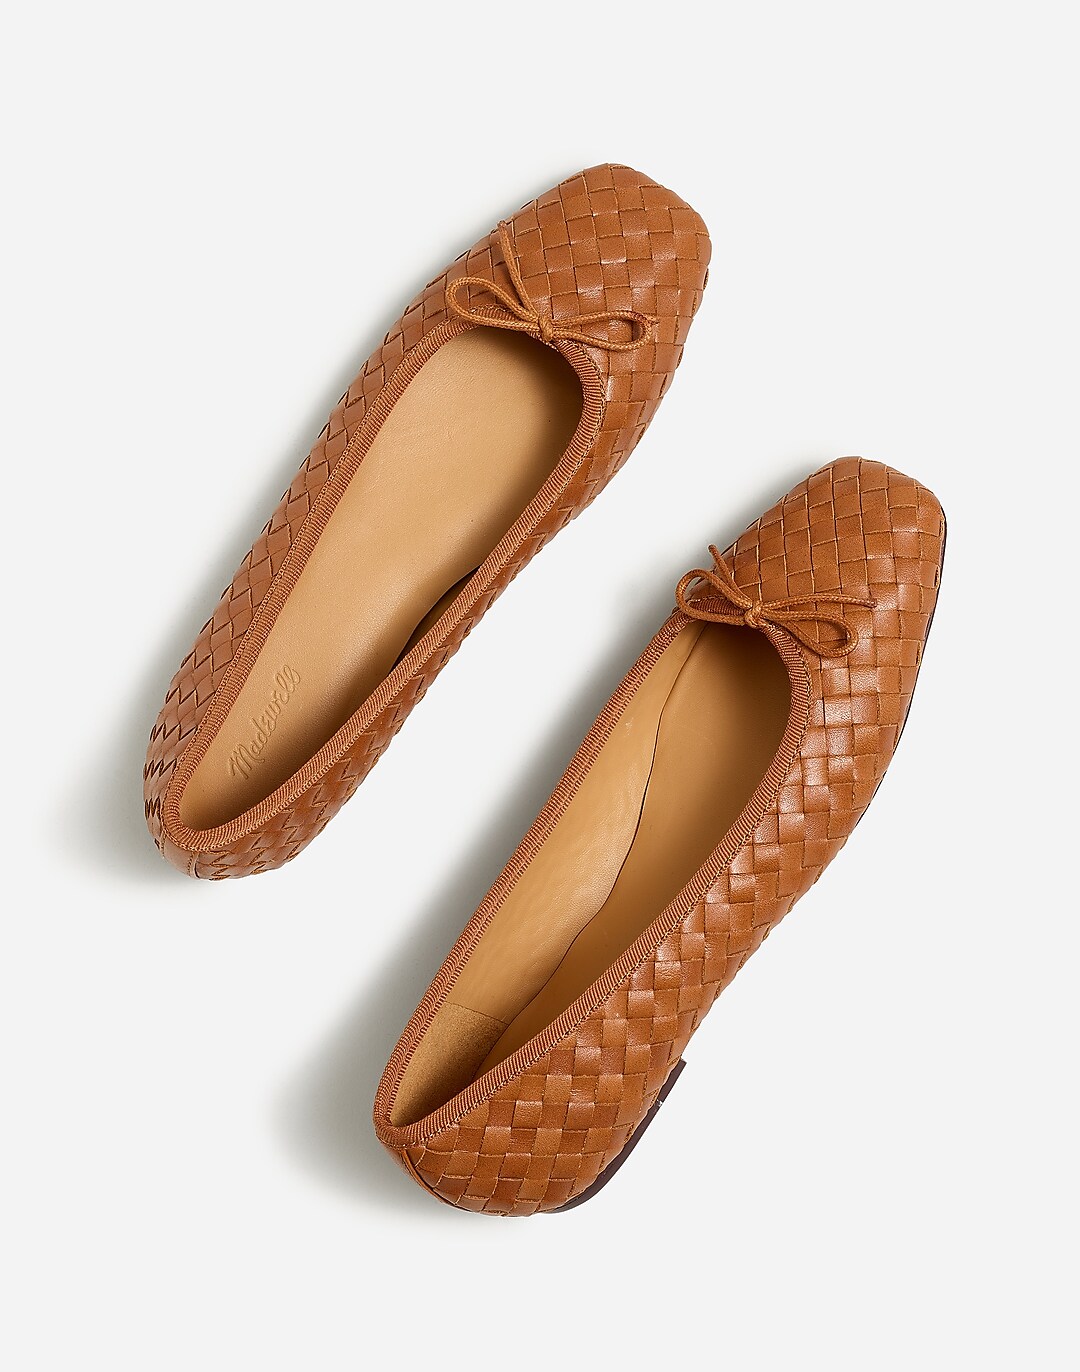 The Anelise Ballet Flat in Woven Leather